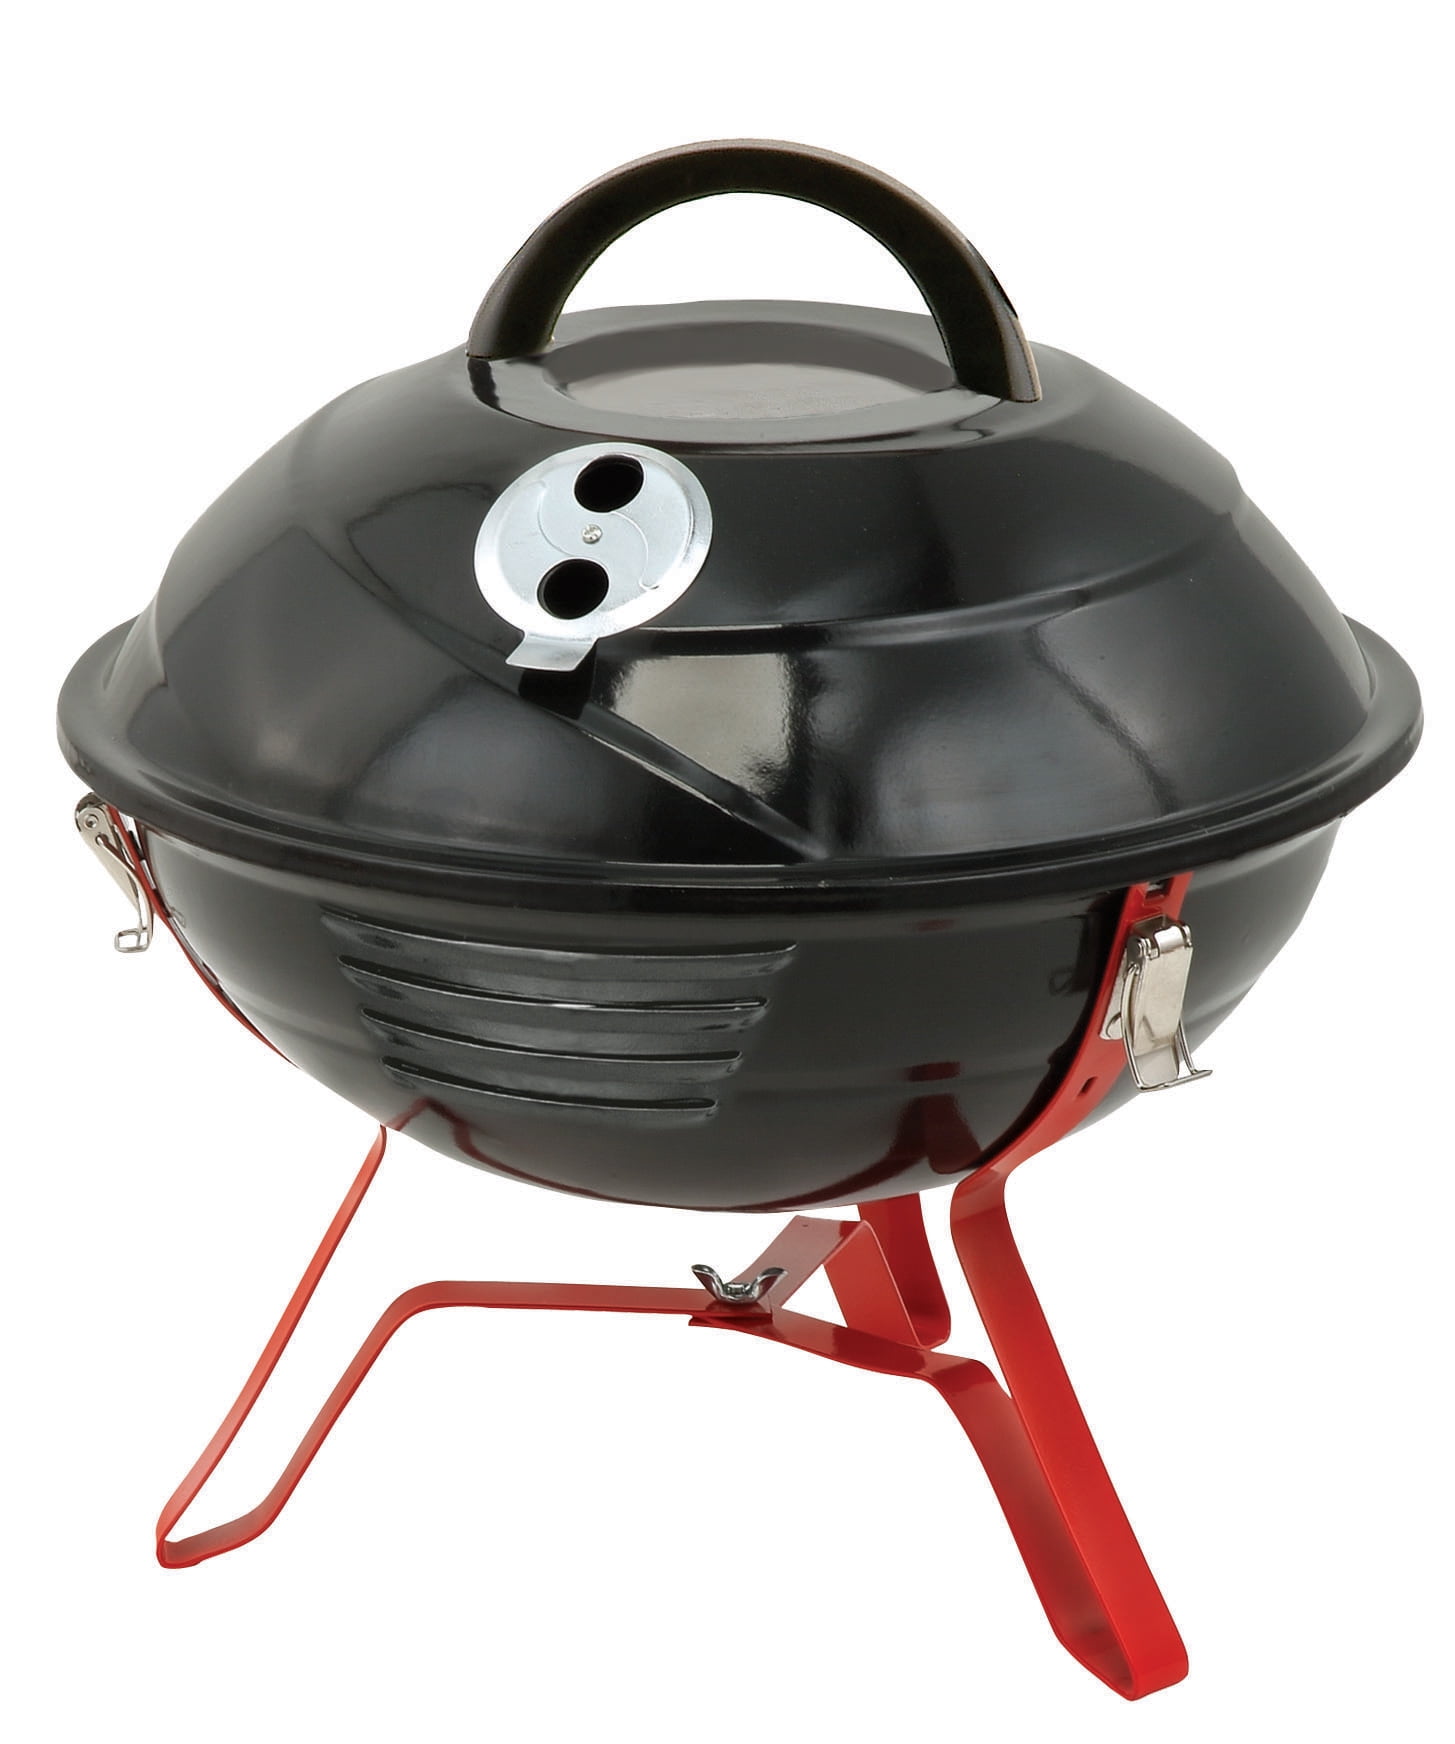 PK Grills PK-TX Folding Stand For The Original PK Grill & Smoker - Premier  Grilling